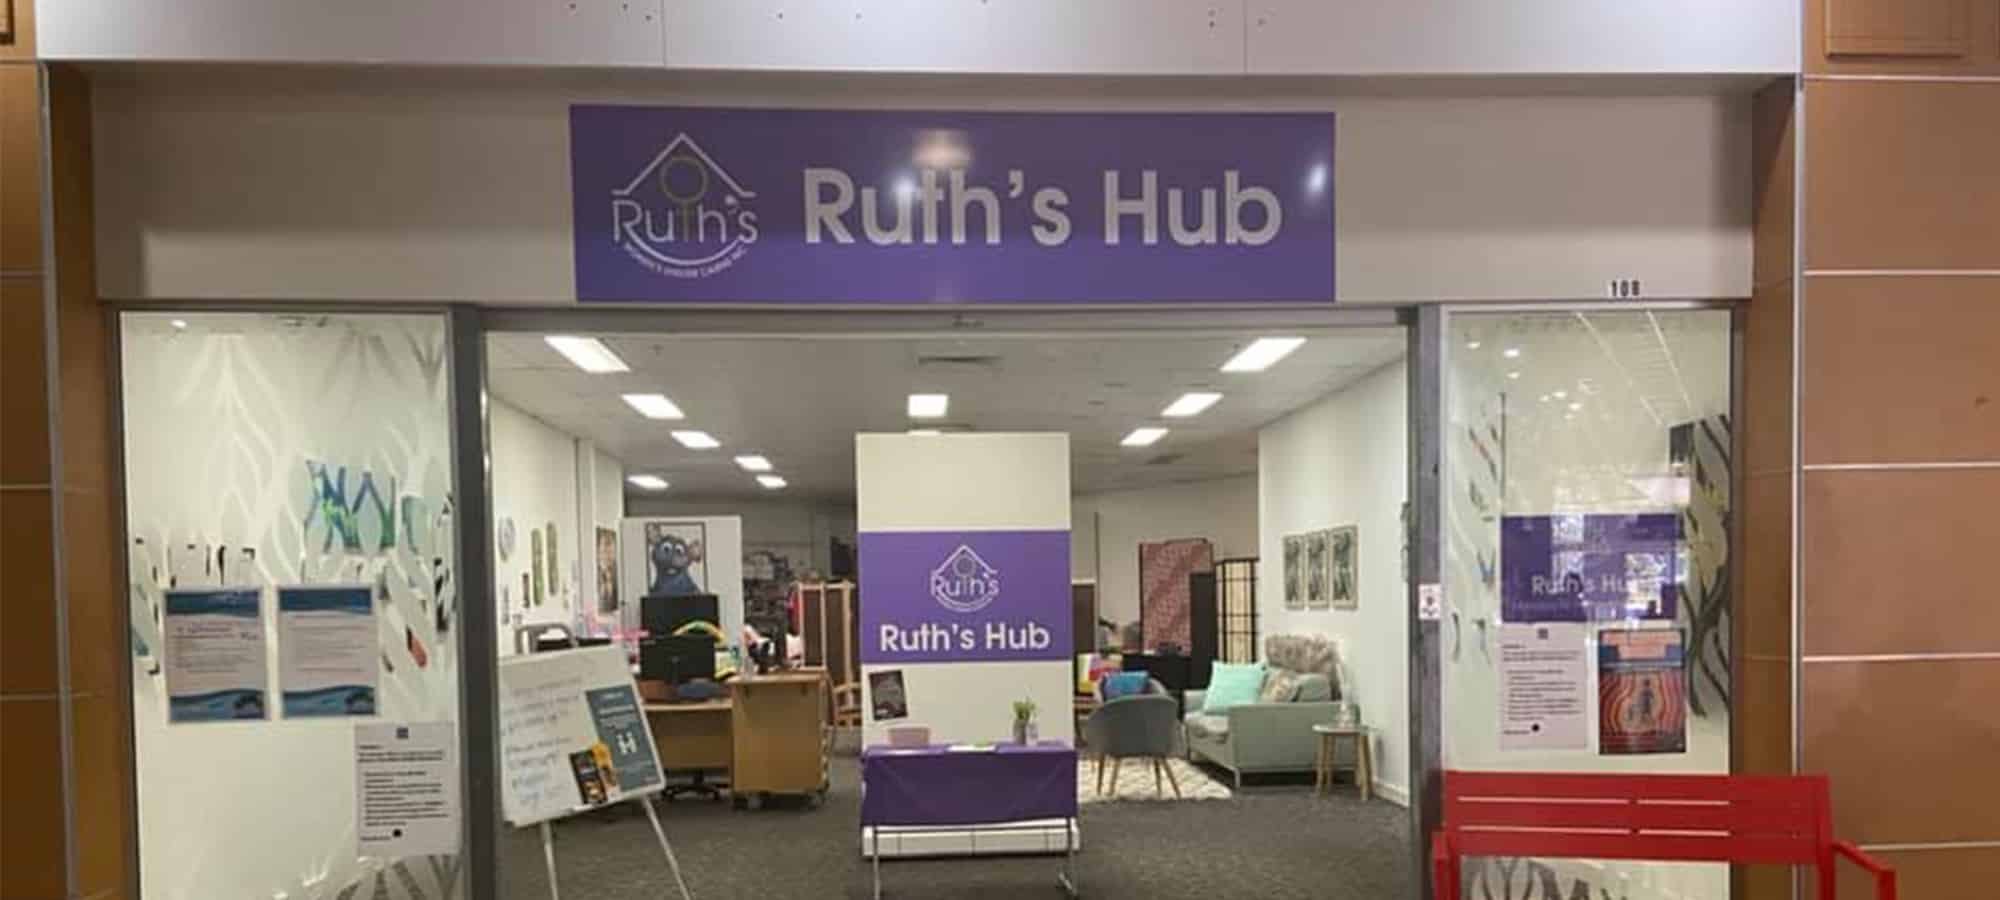 Ruth’s Hub in Raintrees Offering Refuge for Women and Children in Cairns